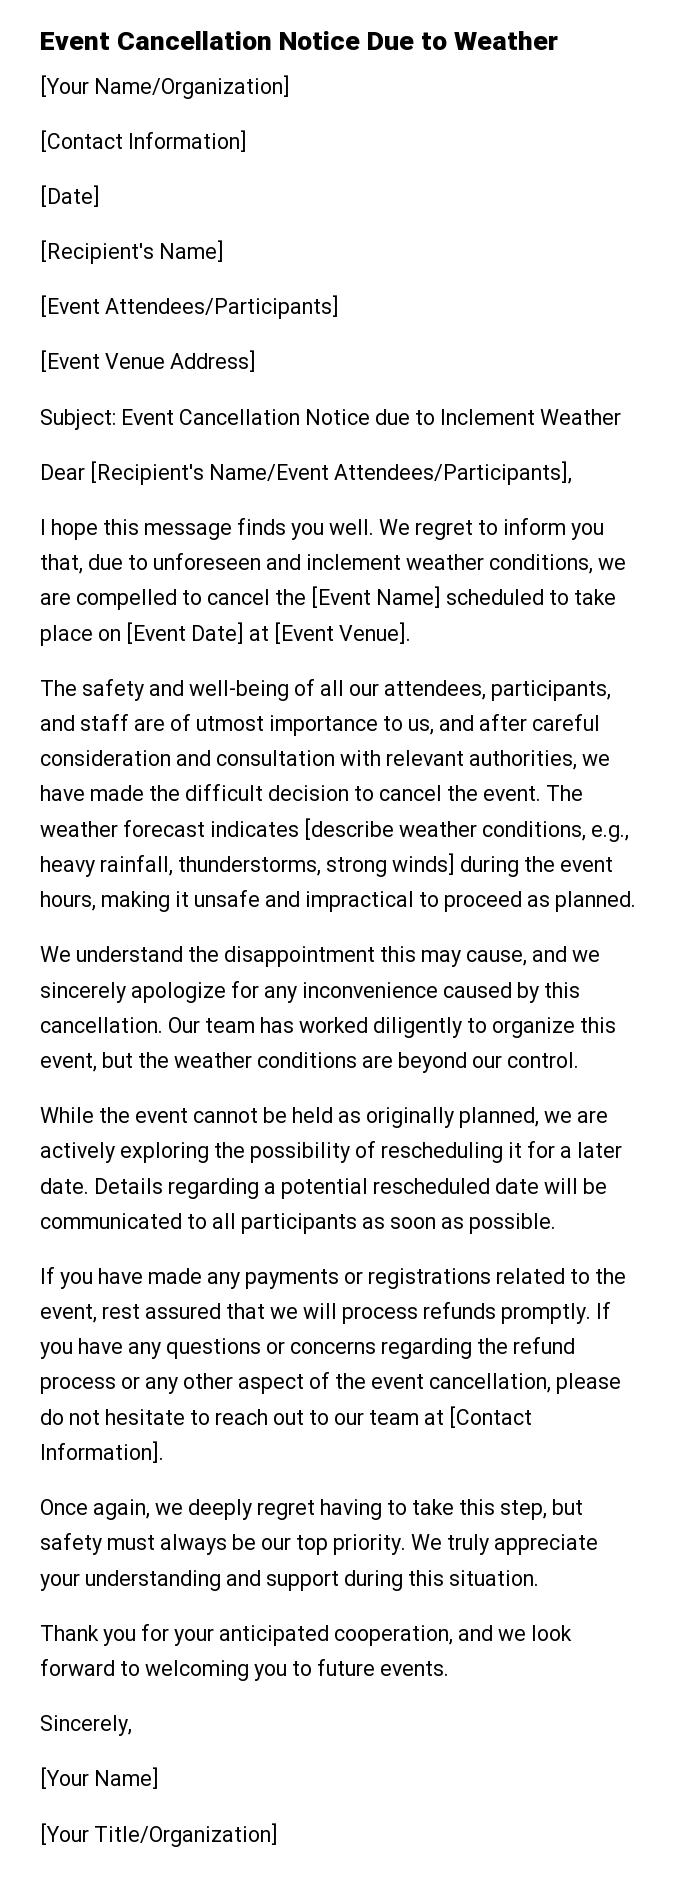 Event Cancellation Notice Due to Weather